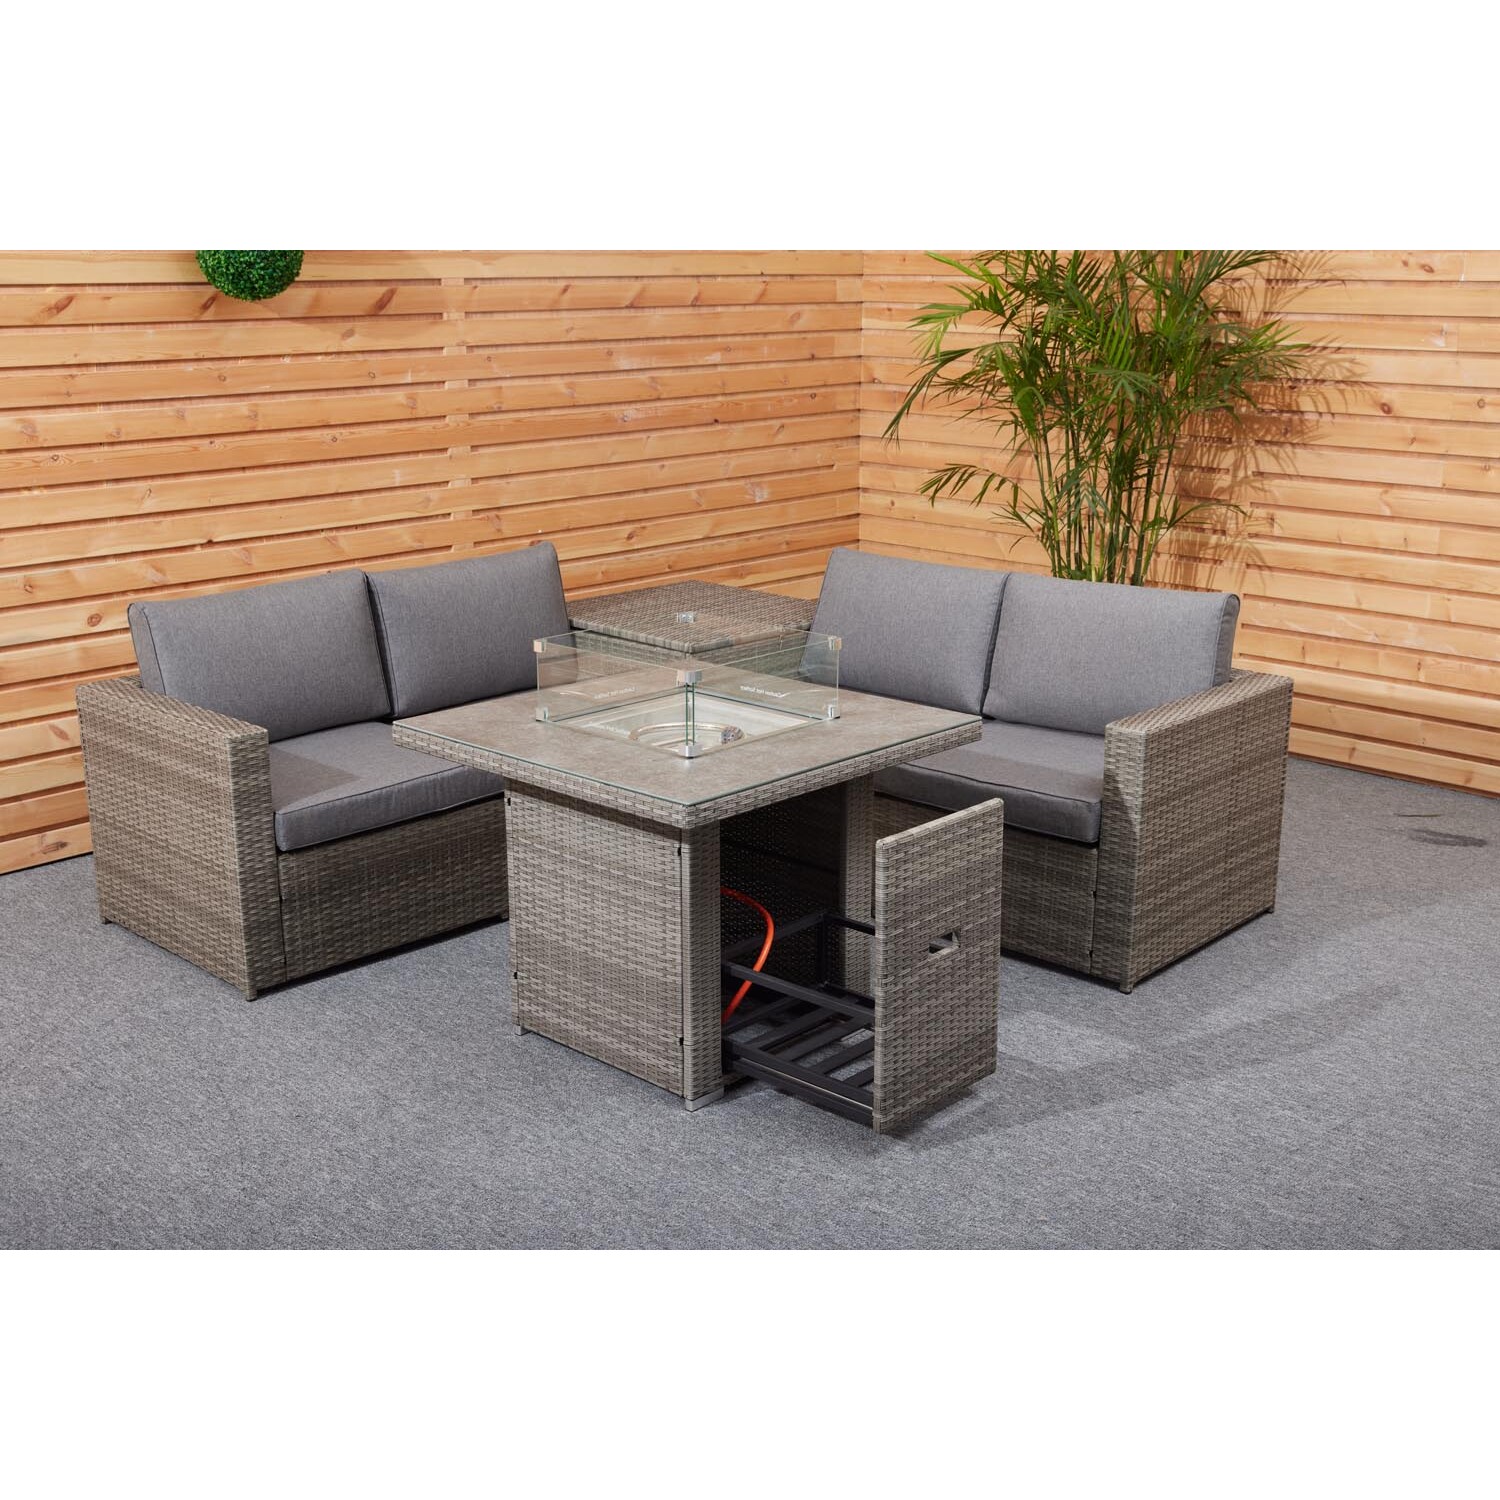 Malay Deluxe Malay New Hampshire 4 Seater Grey Conversation Firepit Lounge Set Image 12